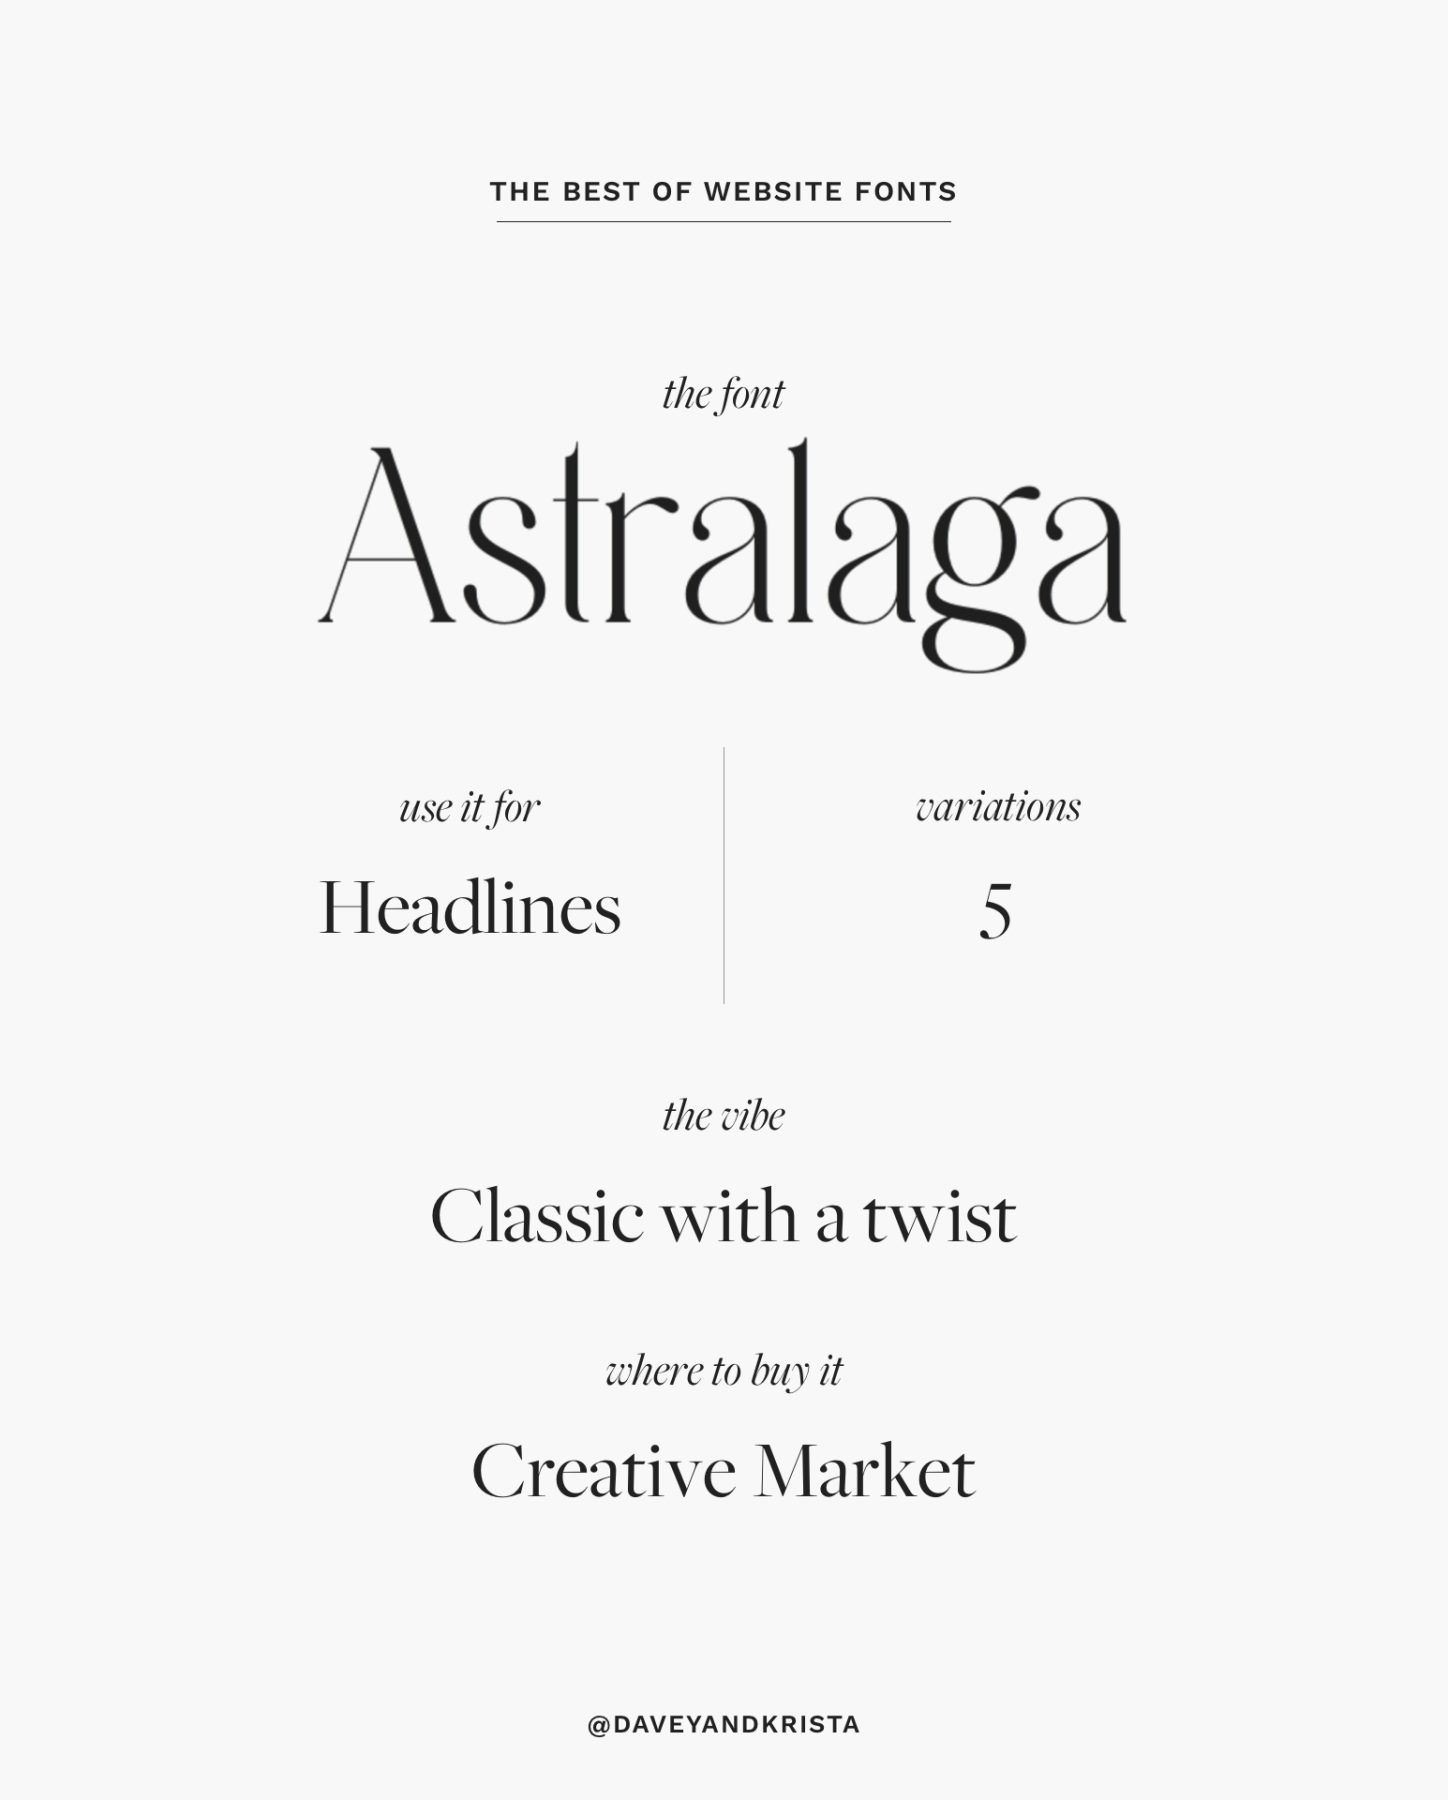 Astralaga - a classic serif to add to your website | The Best Fonts for Websites